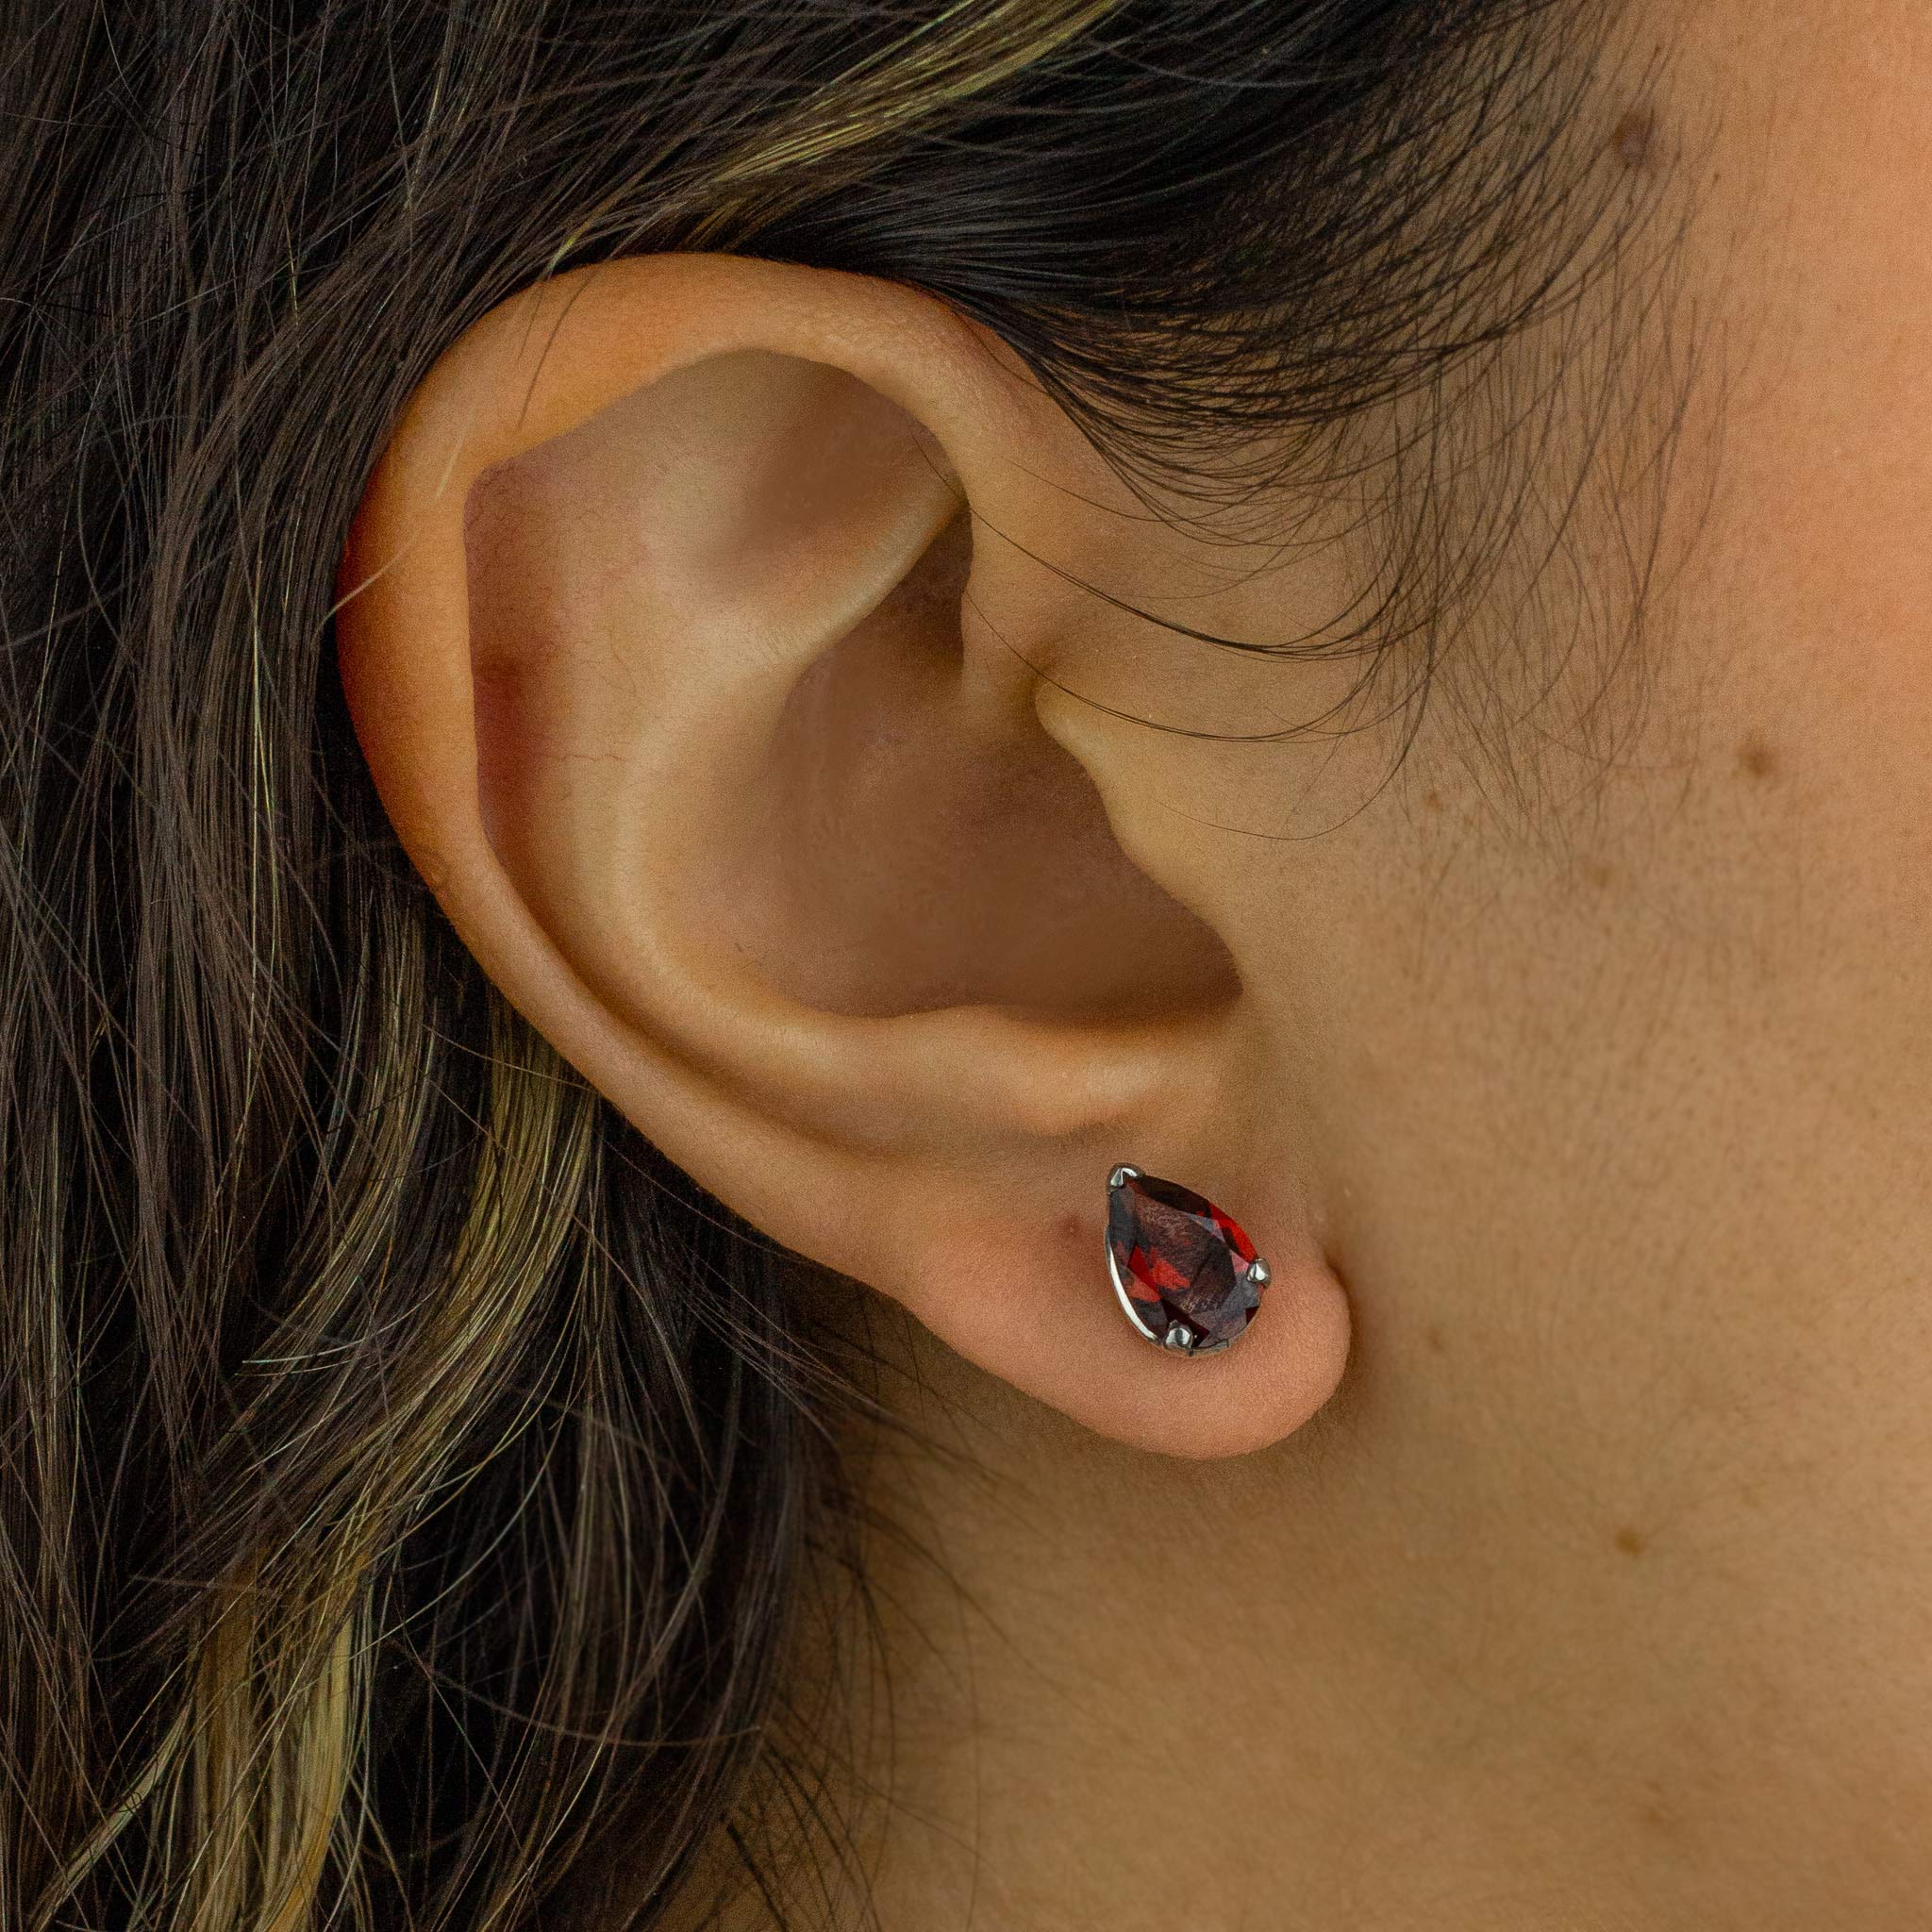 Red garnet and silver earring on ear